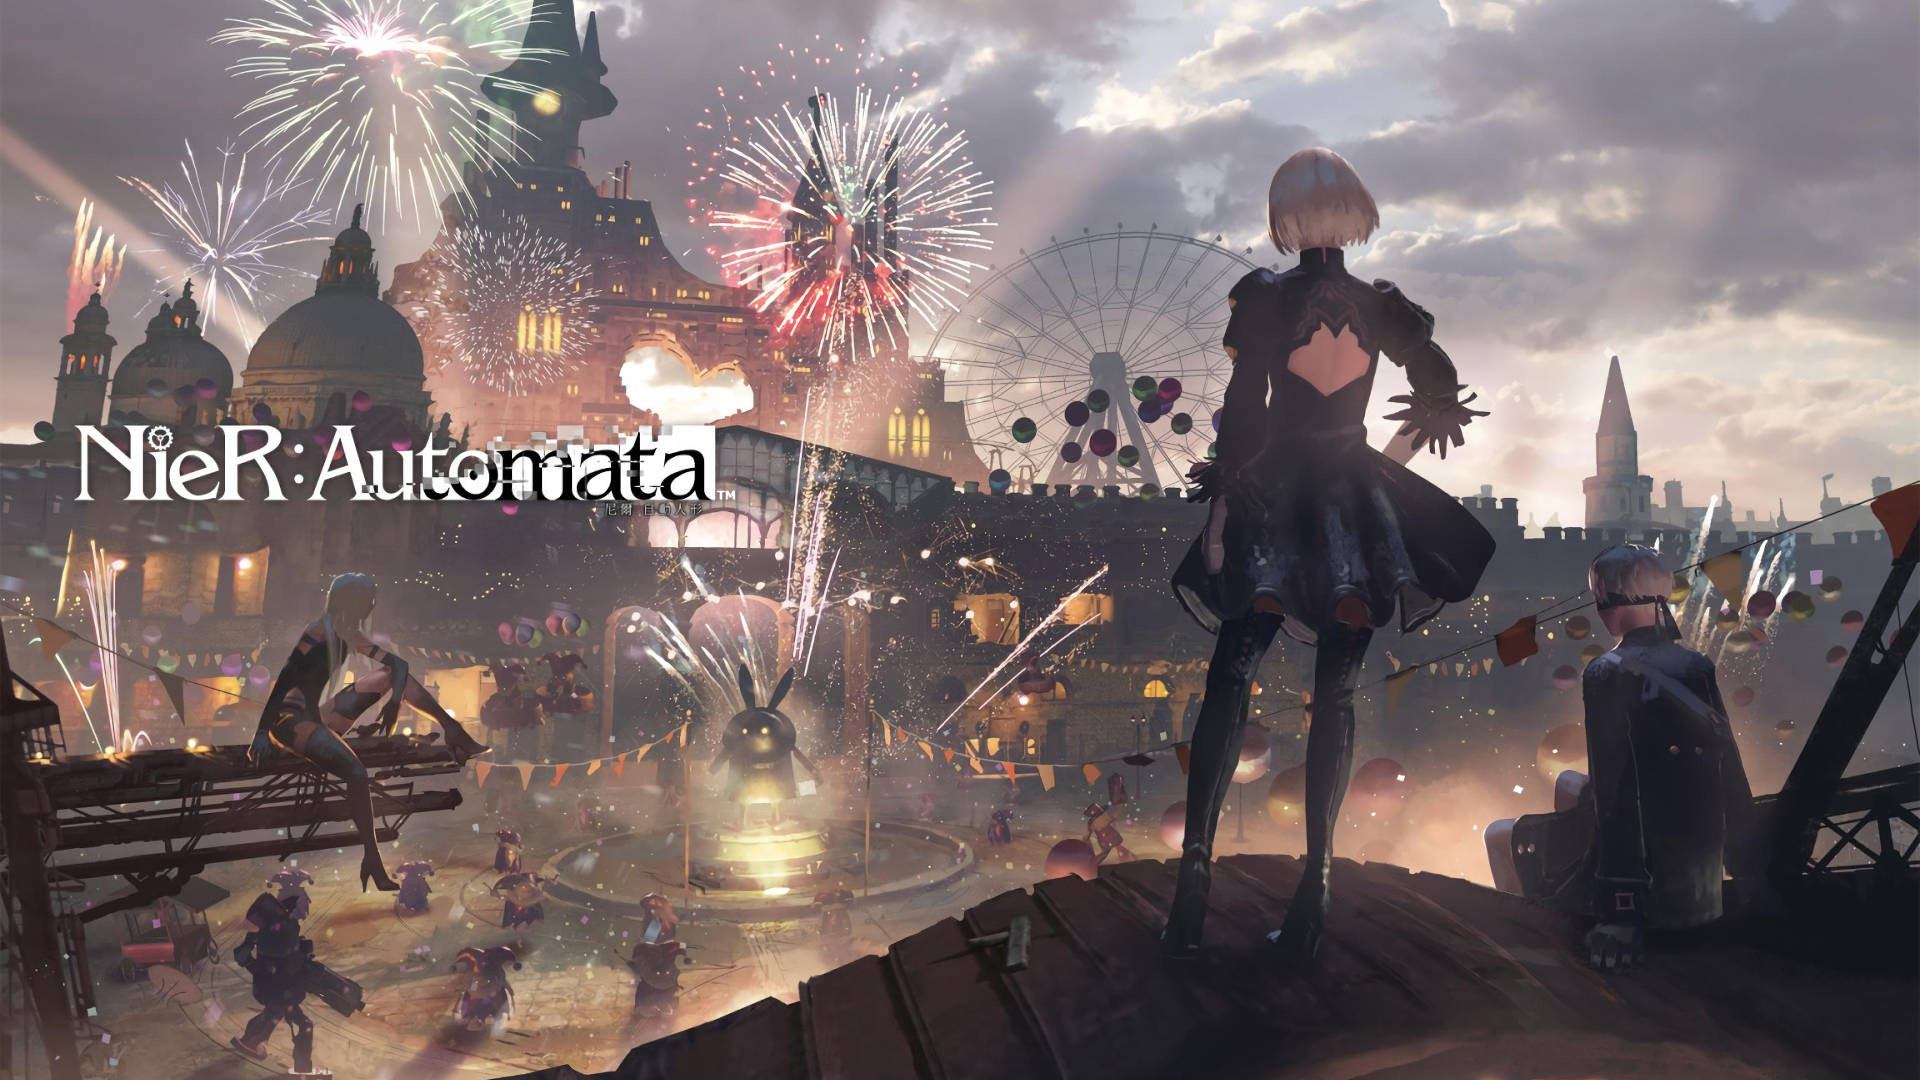 Nier Automata 2b, 9s And A2 On The Carnival Background